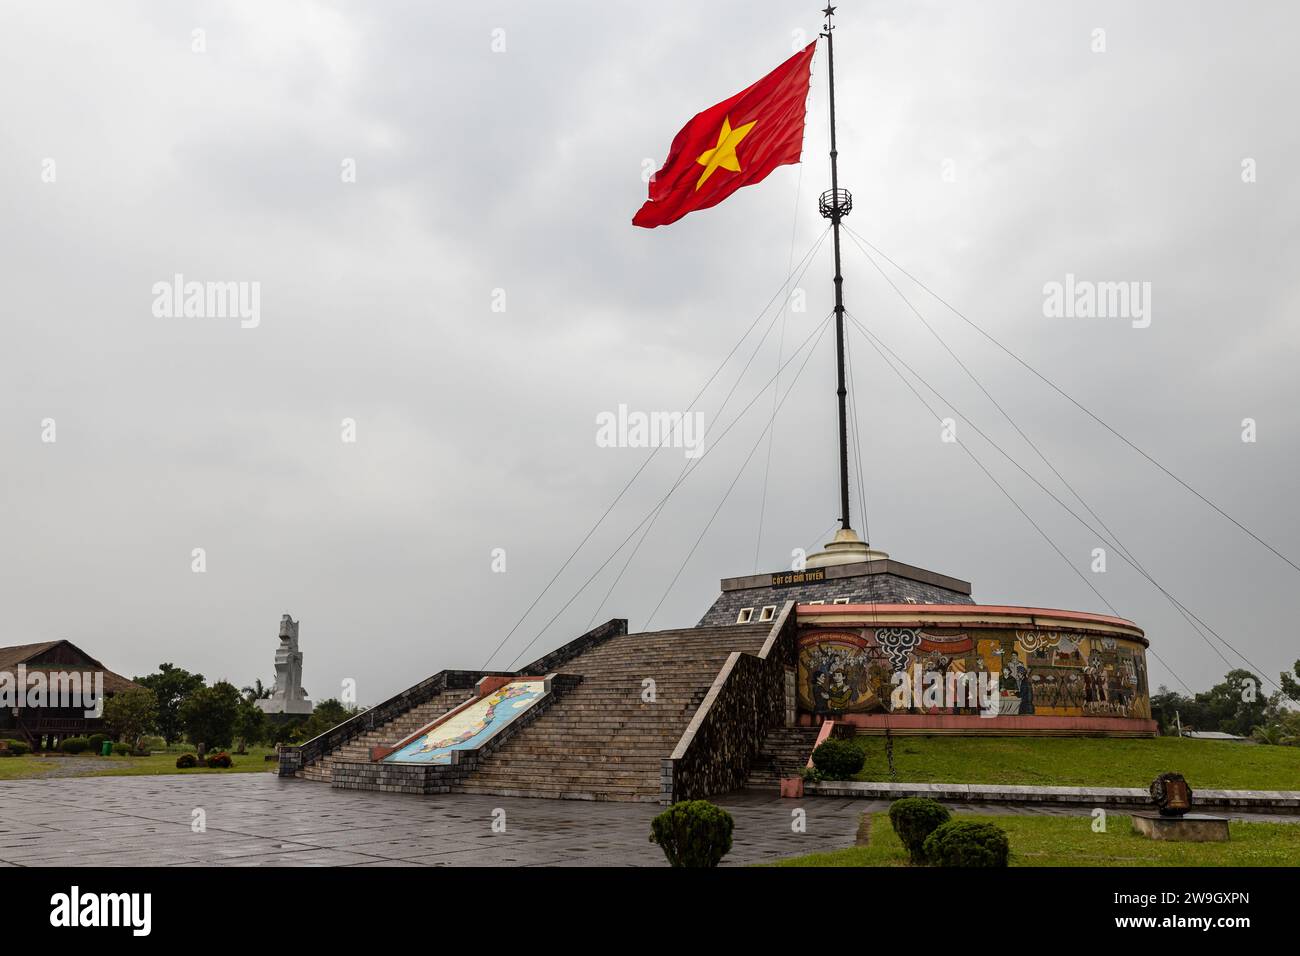 The border between south and north vietnam Stock Photo